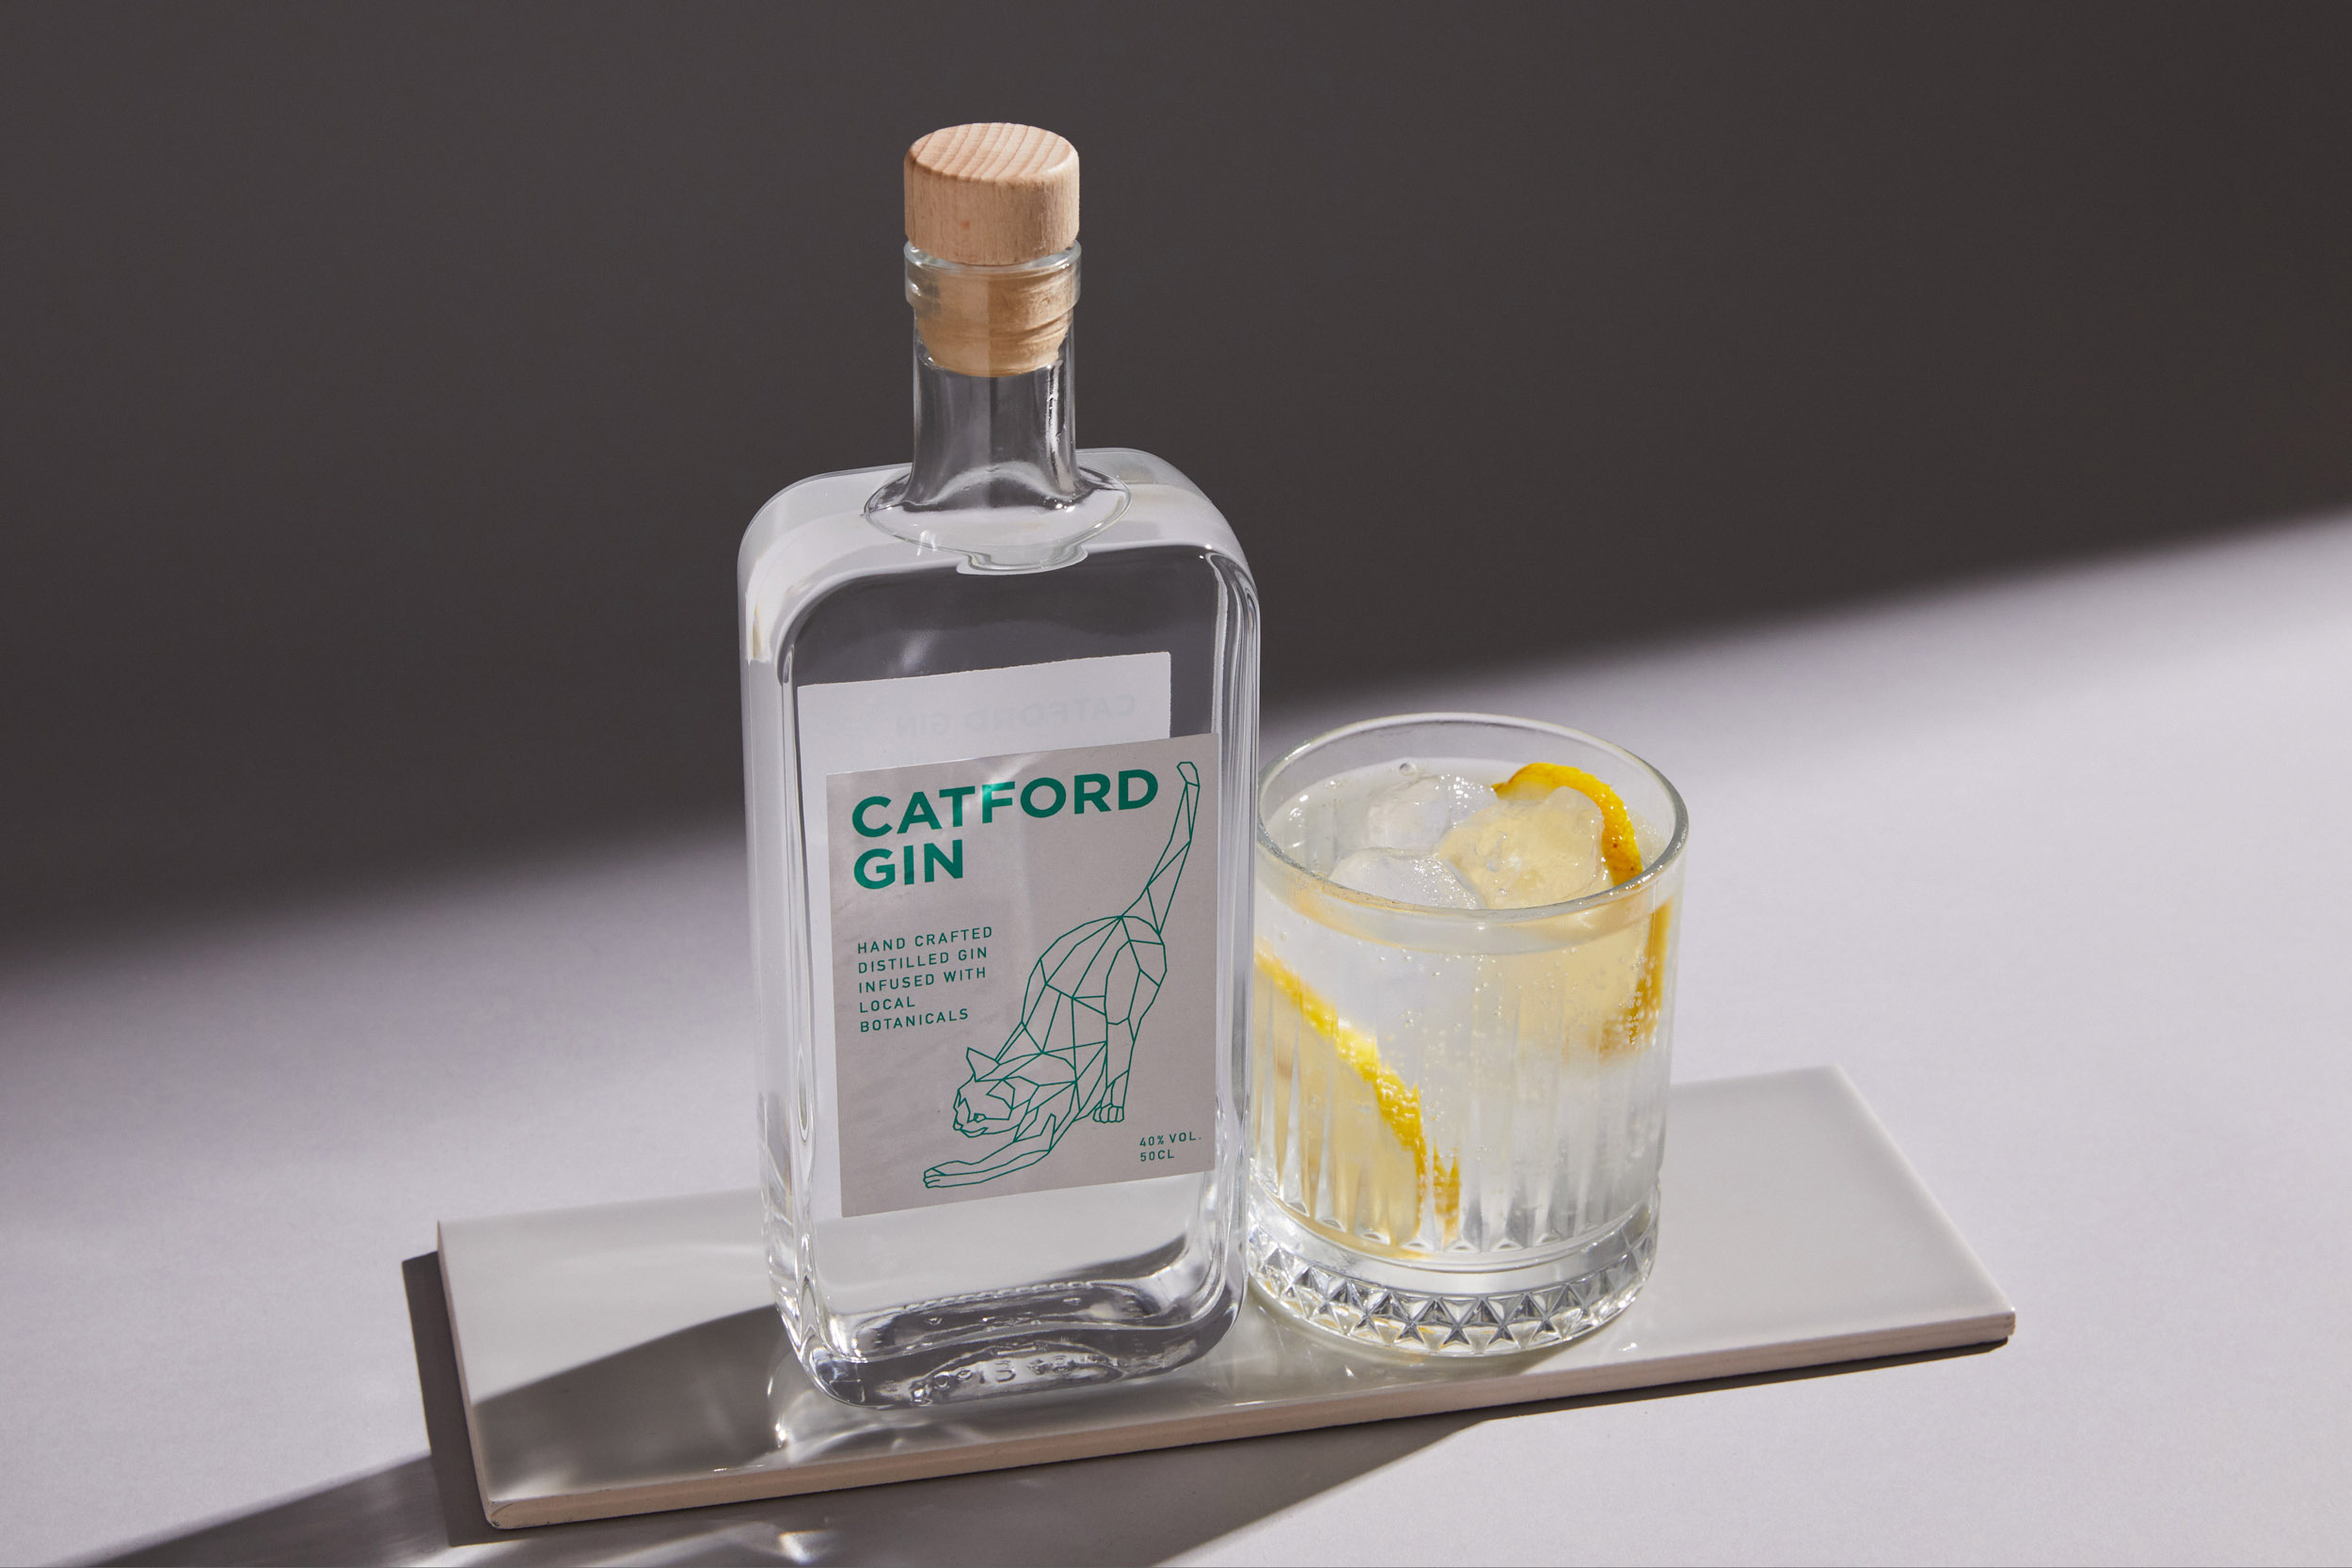 A bottle of Catford Gin with a gin and tonic garnished with lemon